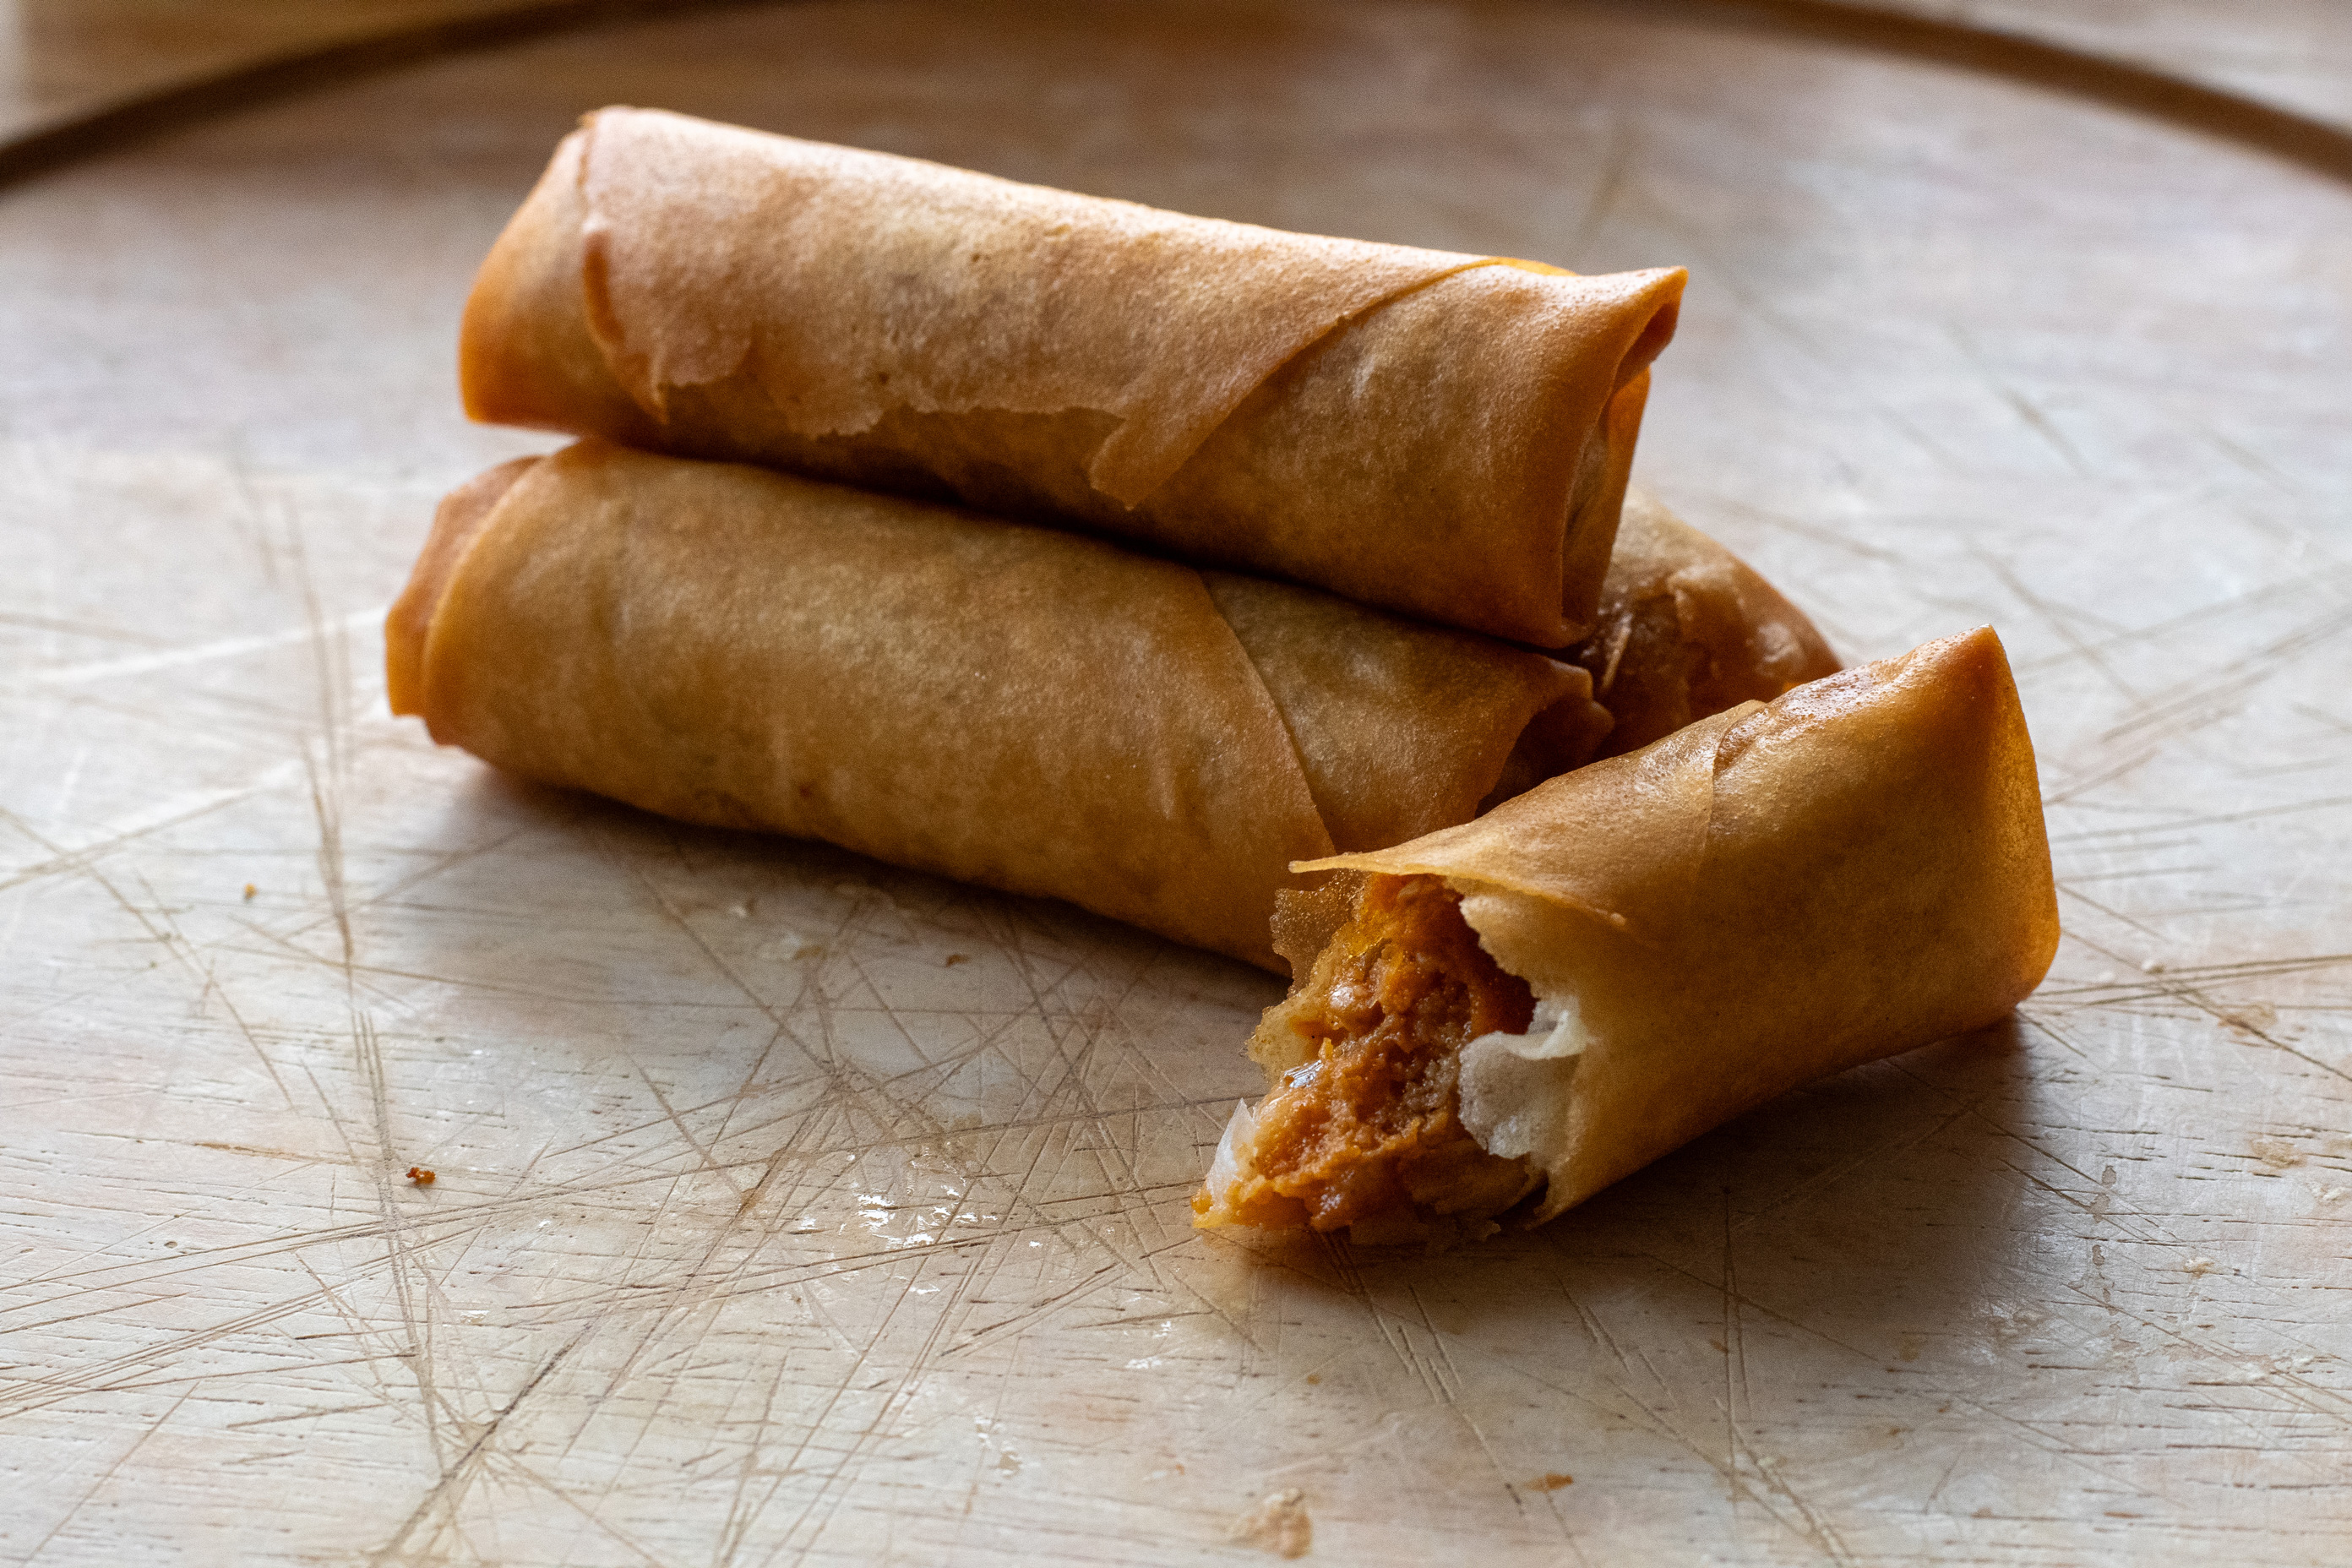 The otah-filled spring roll is the perfect pairing to go with the pizza.